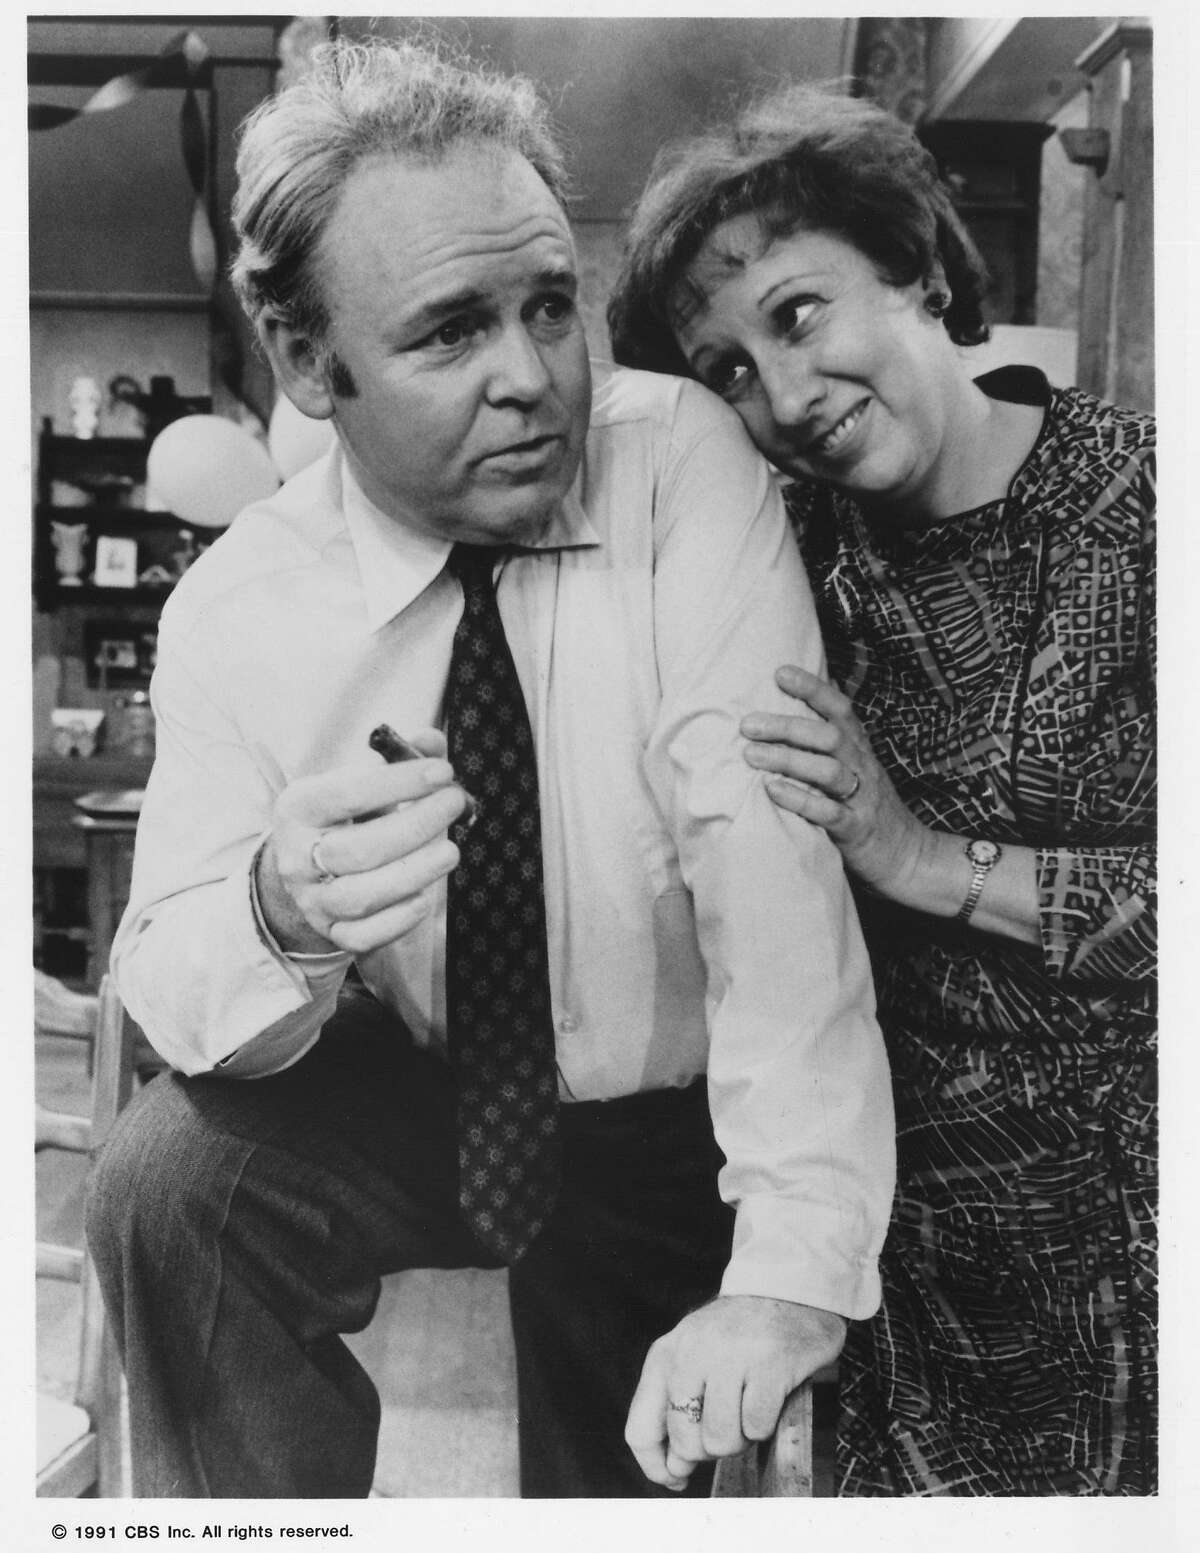 JUN 12, 1991. Carroll O'Connor and Jean Stapleton star as Archie and Edith Bunker on the landmark series ALL IN THE FAMILY, which returns to television Sunday, June 2 (8:30-9:00 PM, ET/PT) on the CBS Televison Network for six episodes. The series will follow SUNDAY DINNER (8:00-8:30 PM, ET/PT), Norman Lear's latest comedy entry, on the CBS Television Network. HOUCHRON CAPTION (01/02/2000): "All in the Family" - 1971-1979. HOUCHRON CAPTION (12/25/2000): Carroll O'Connor and Jean Stapleton, in left photo, starred as Archie and Edith Bunker in the breakthrough sitcom All in the Family (1971-79). HOUCHRON CAPTION (03/11/2002): Archie Bunker, who was played by Carroll O'Connor, makes a good case for home ownership.